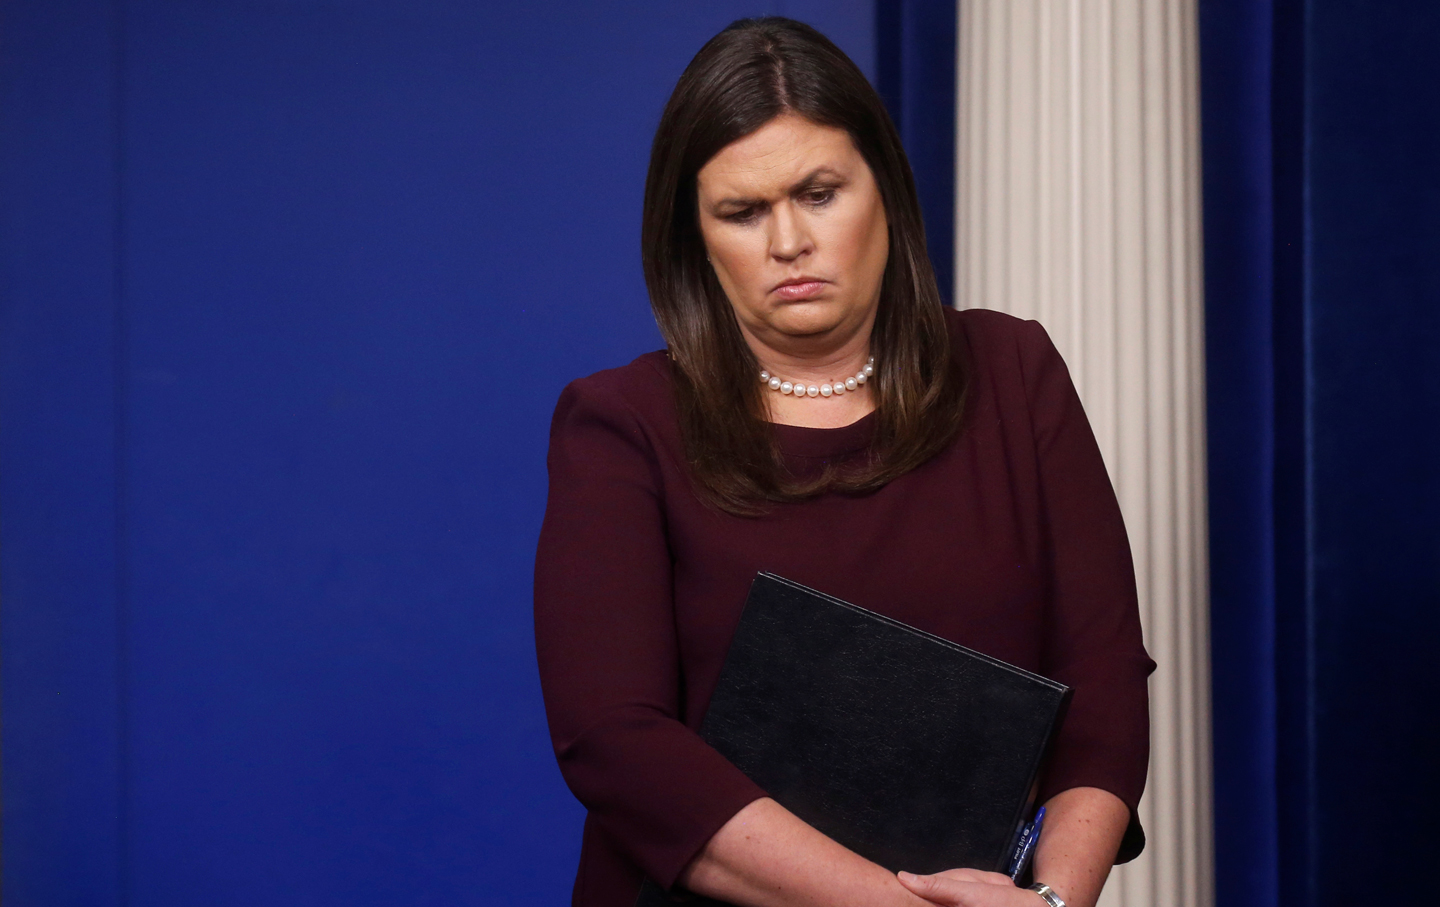 This One Time, Sarah Huckabee Sanders Won’t Back Up Trump